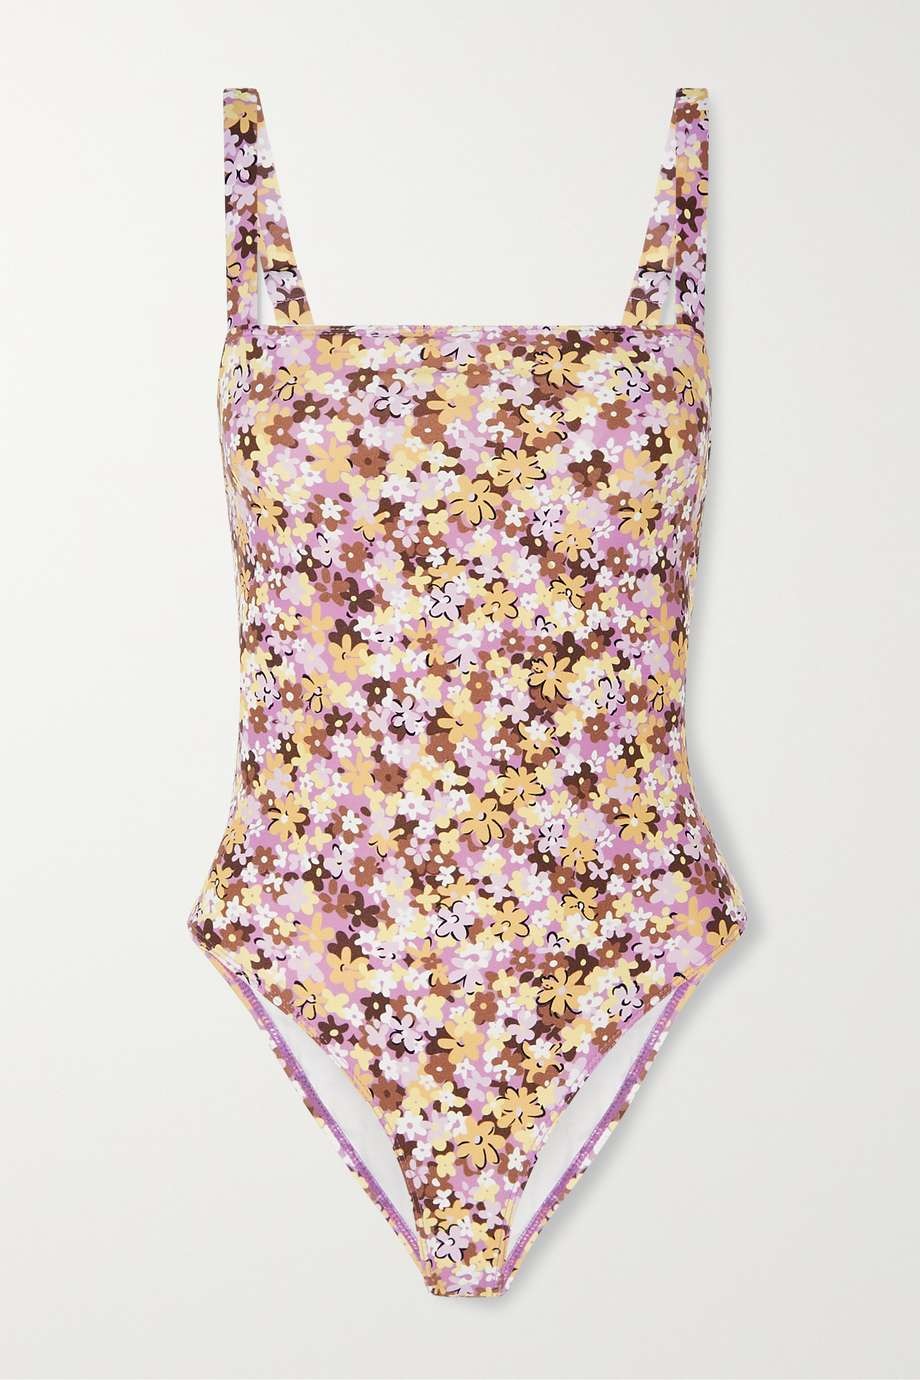 30 Striking One-Piece Swimsuits You Can Also Wear as Tops | Who What Wear